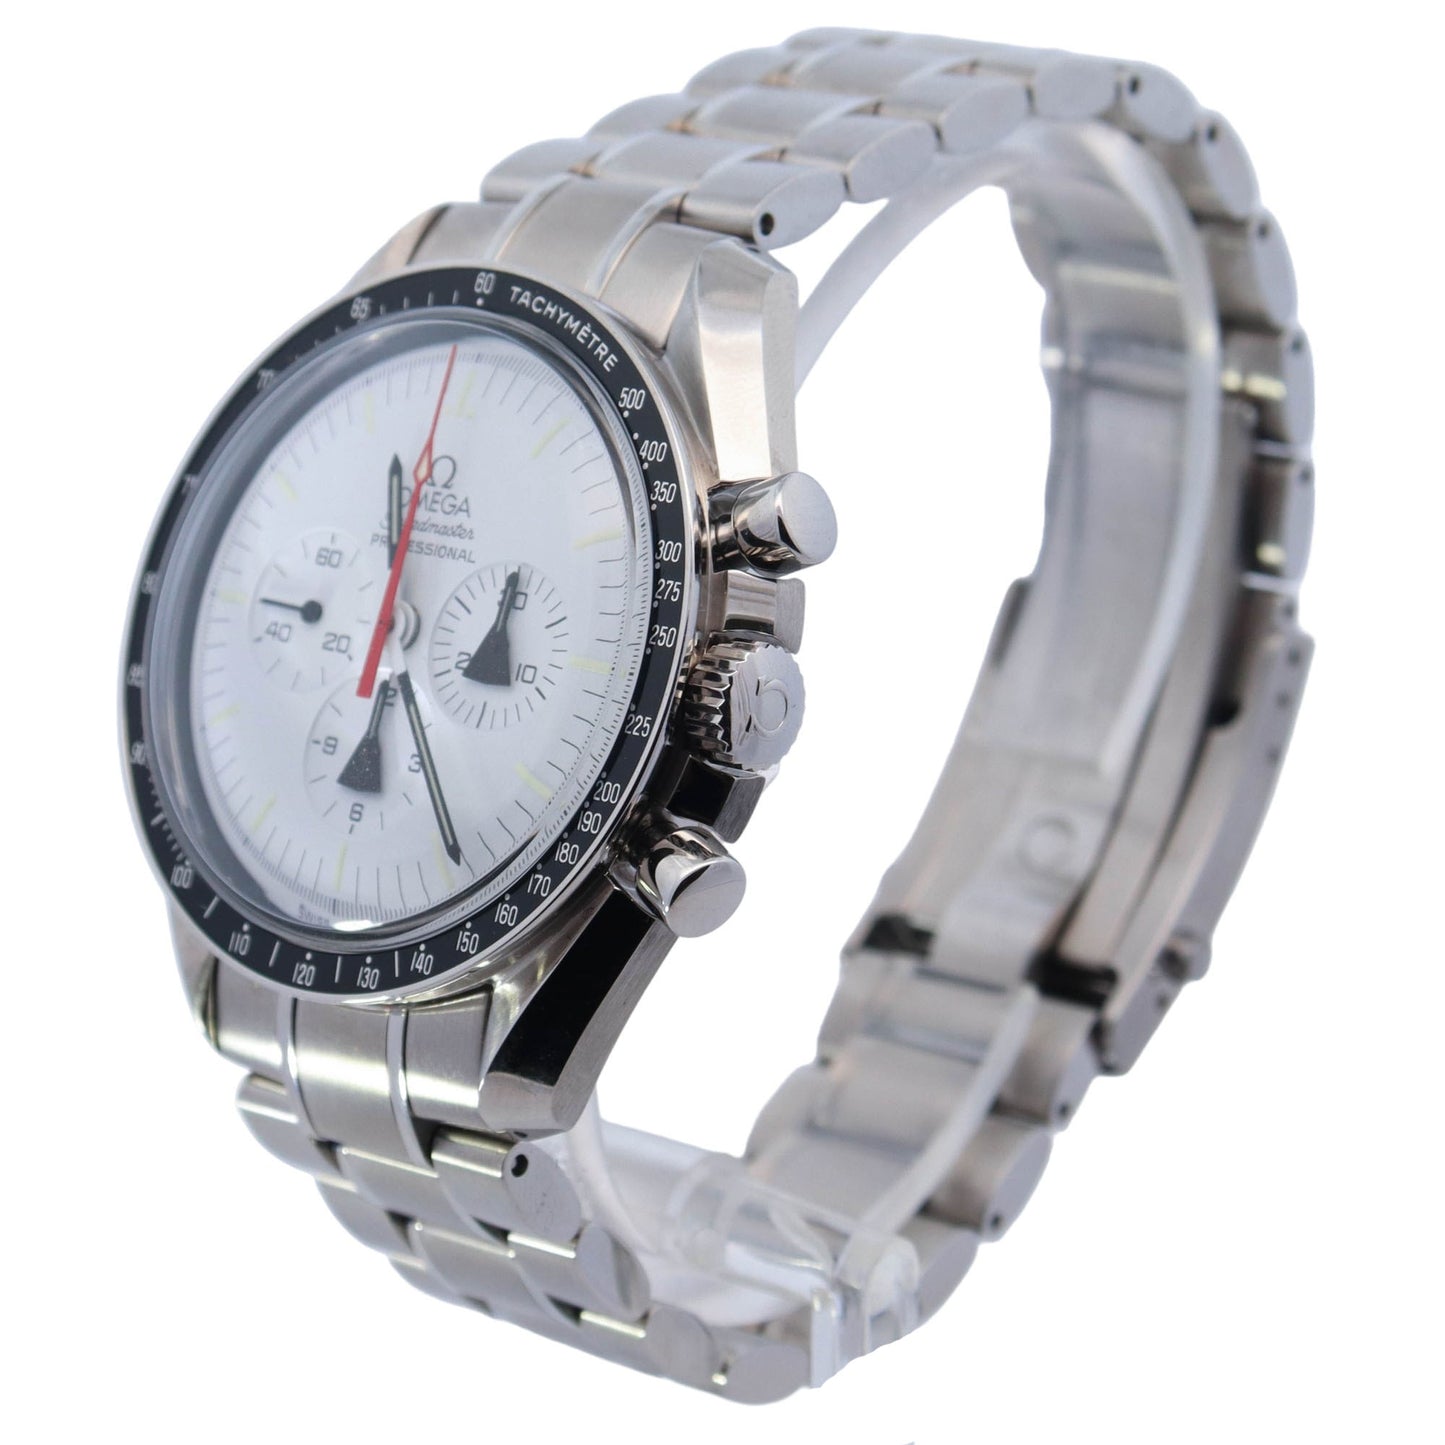 Omega Speedmaster Professional Moonswatch "Alaska Project" Stainless Steel 42mm White Chronograph Dial Watch Reference# 311.32.42.30.04.001